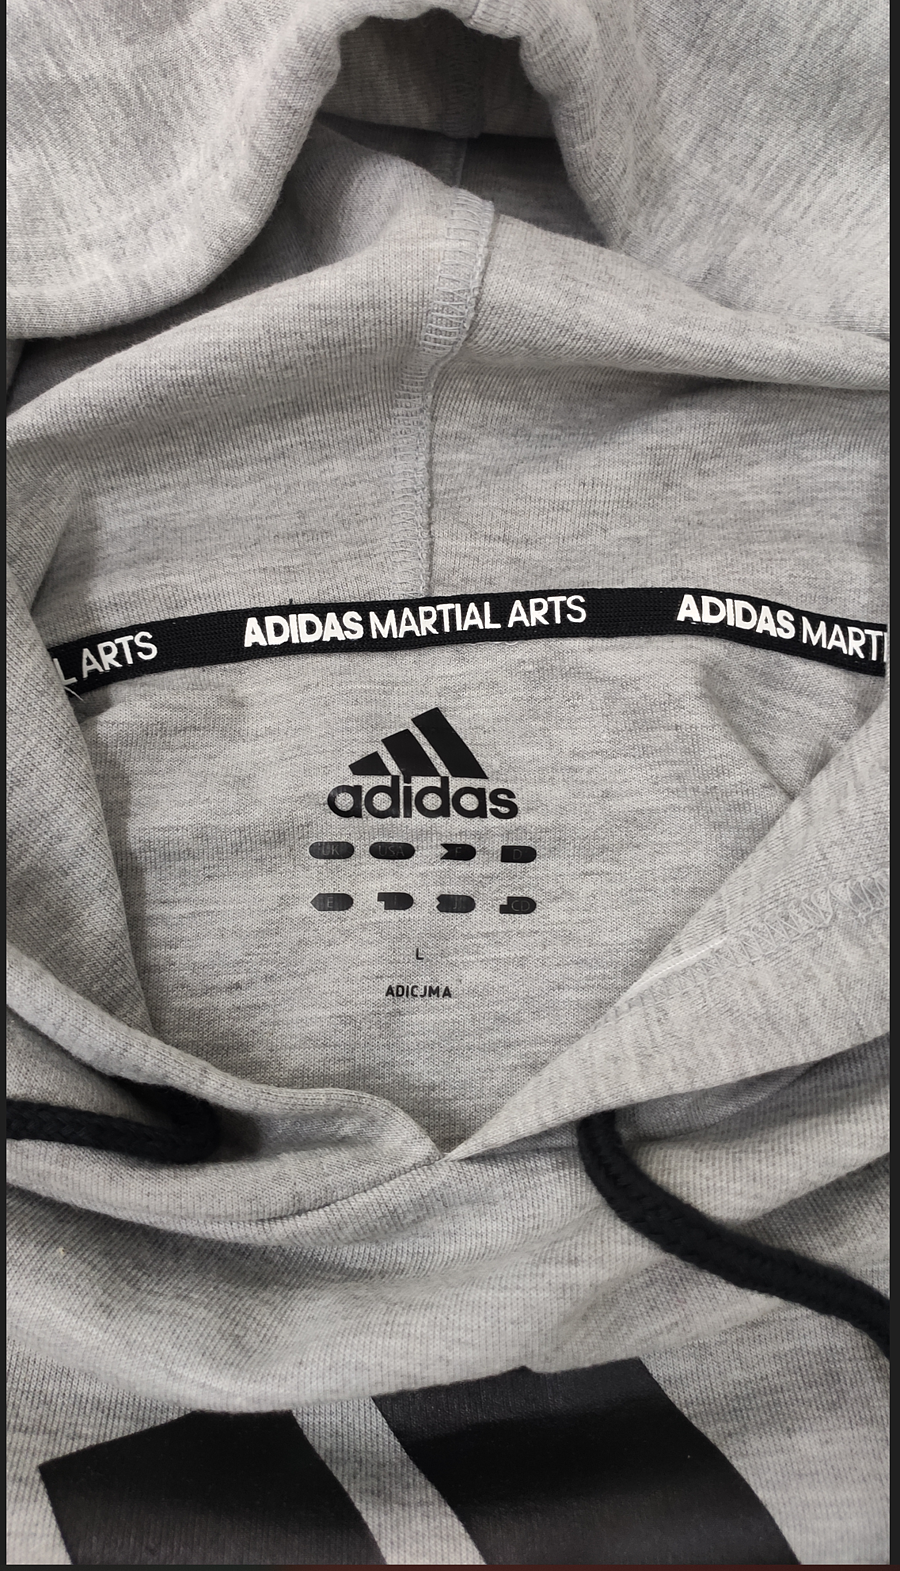 SPECIAL OFFER Adidas hoodie for couple models  Size：M #530893 replica